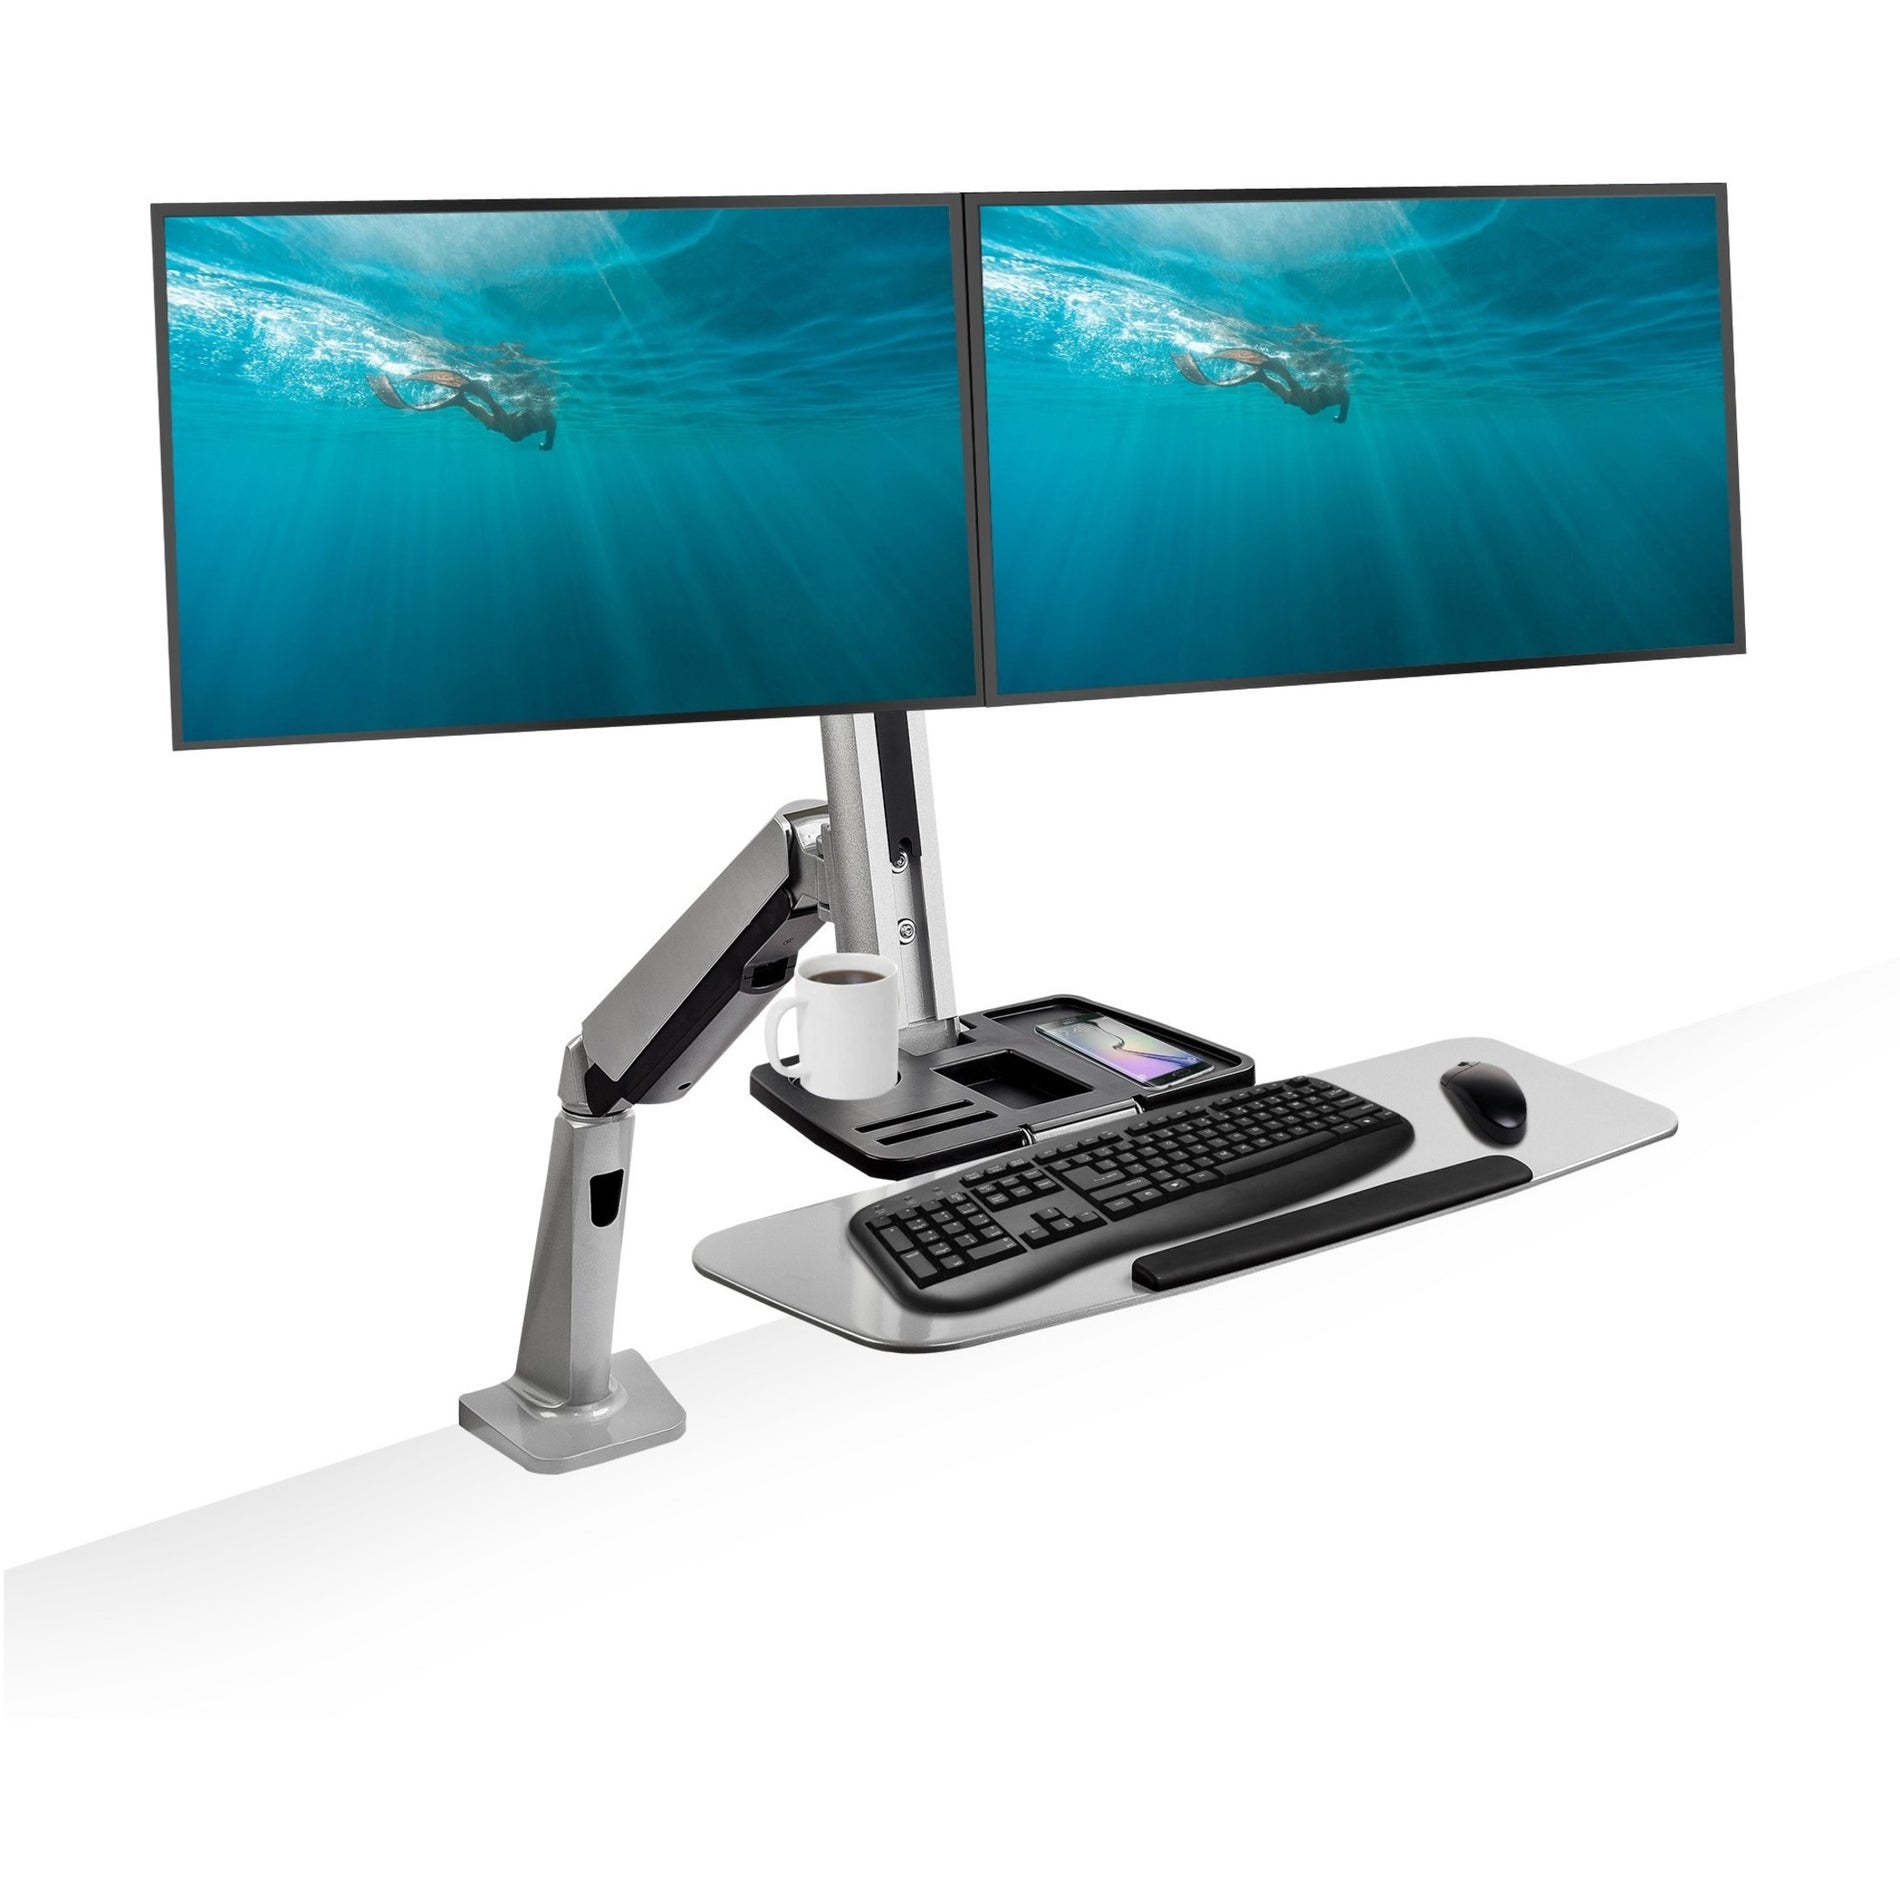 SIIG CE-MT2G12-S1 Mounting Arm, Dual Gas Spring Desk Mount - Holds 2 Monitors, 27" Max, 13.20 lb Capacity